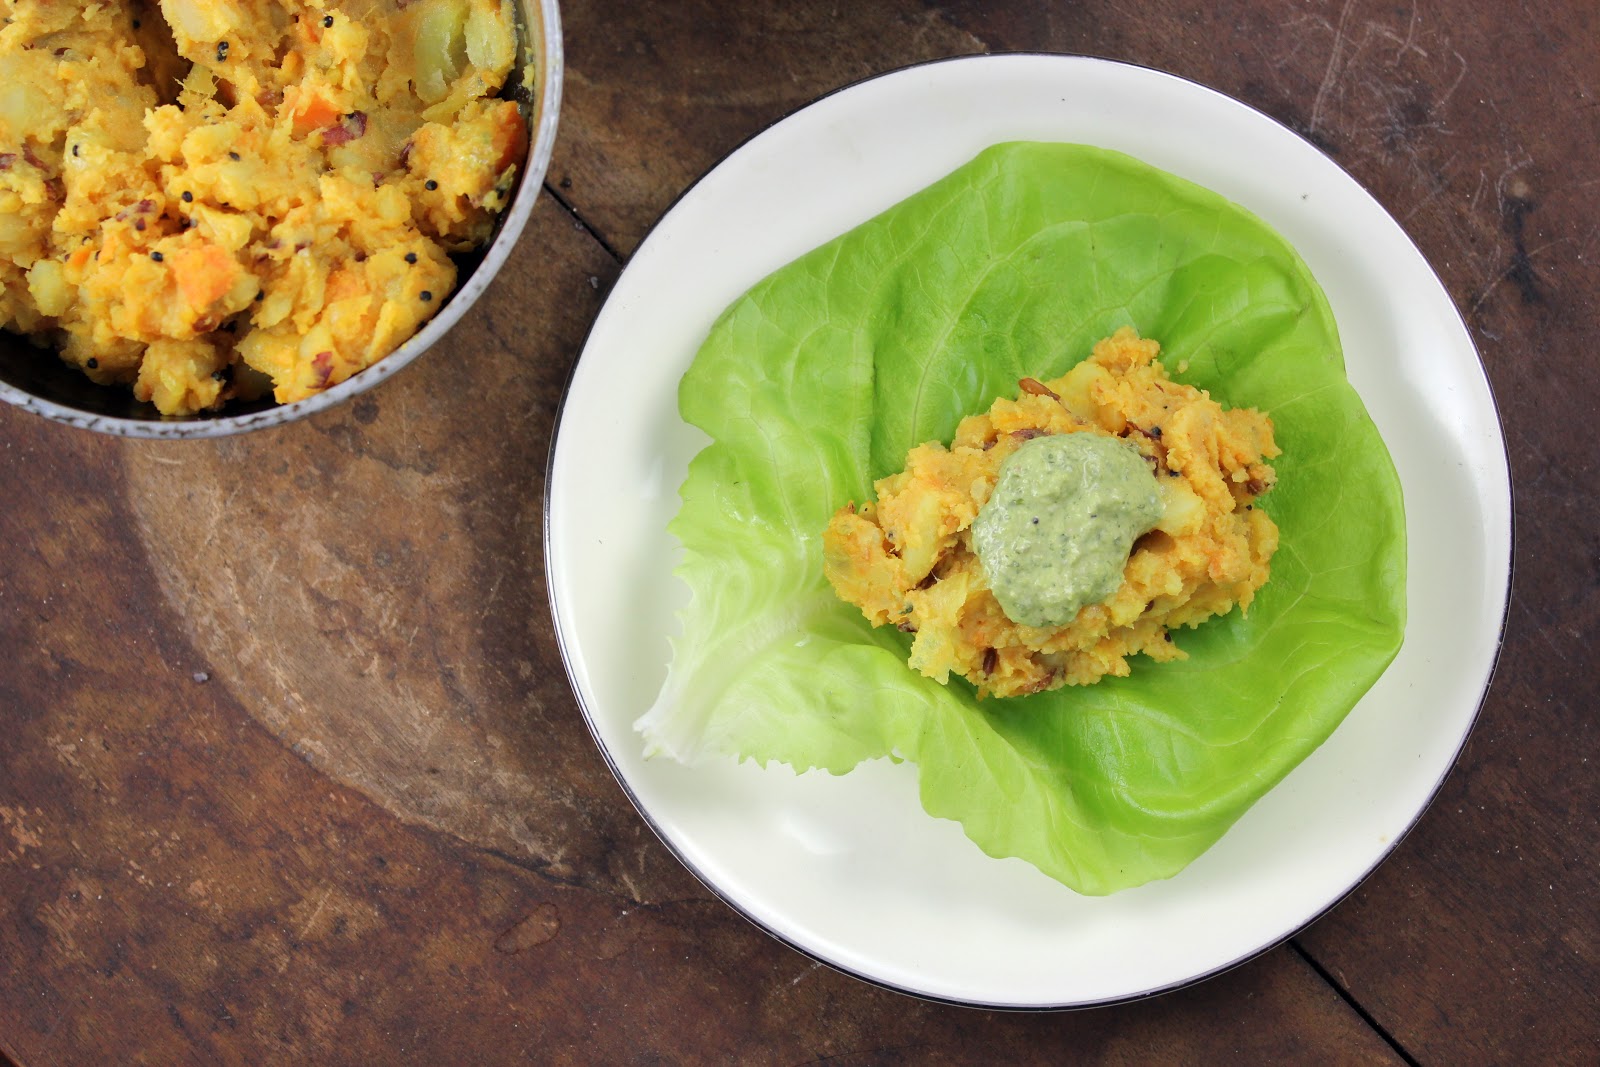 assembled lettuce dosa with potato curry, coconut chutney